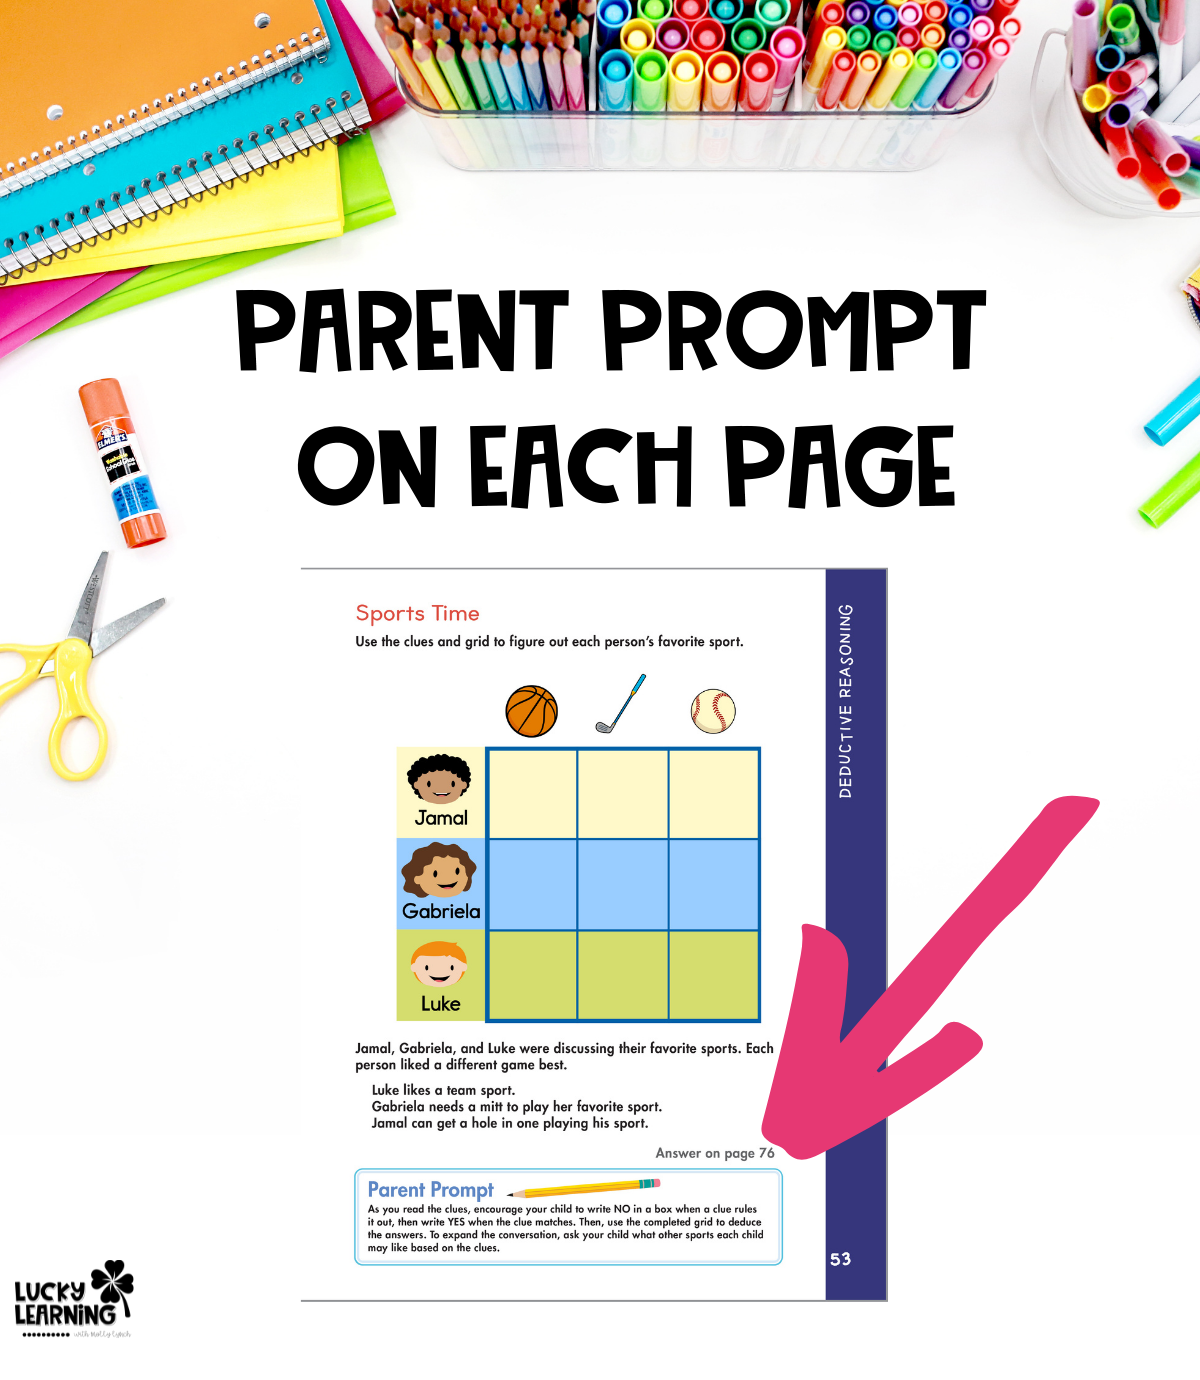 parent prompts on each page | Lucky Learning with Molly Lynch